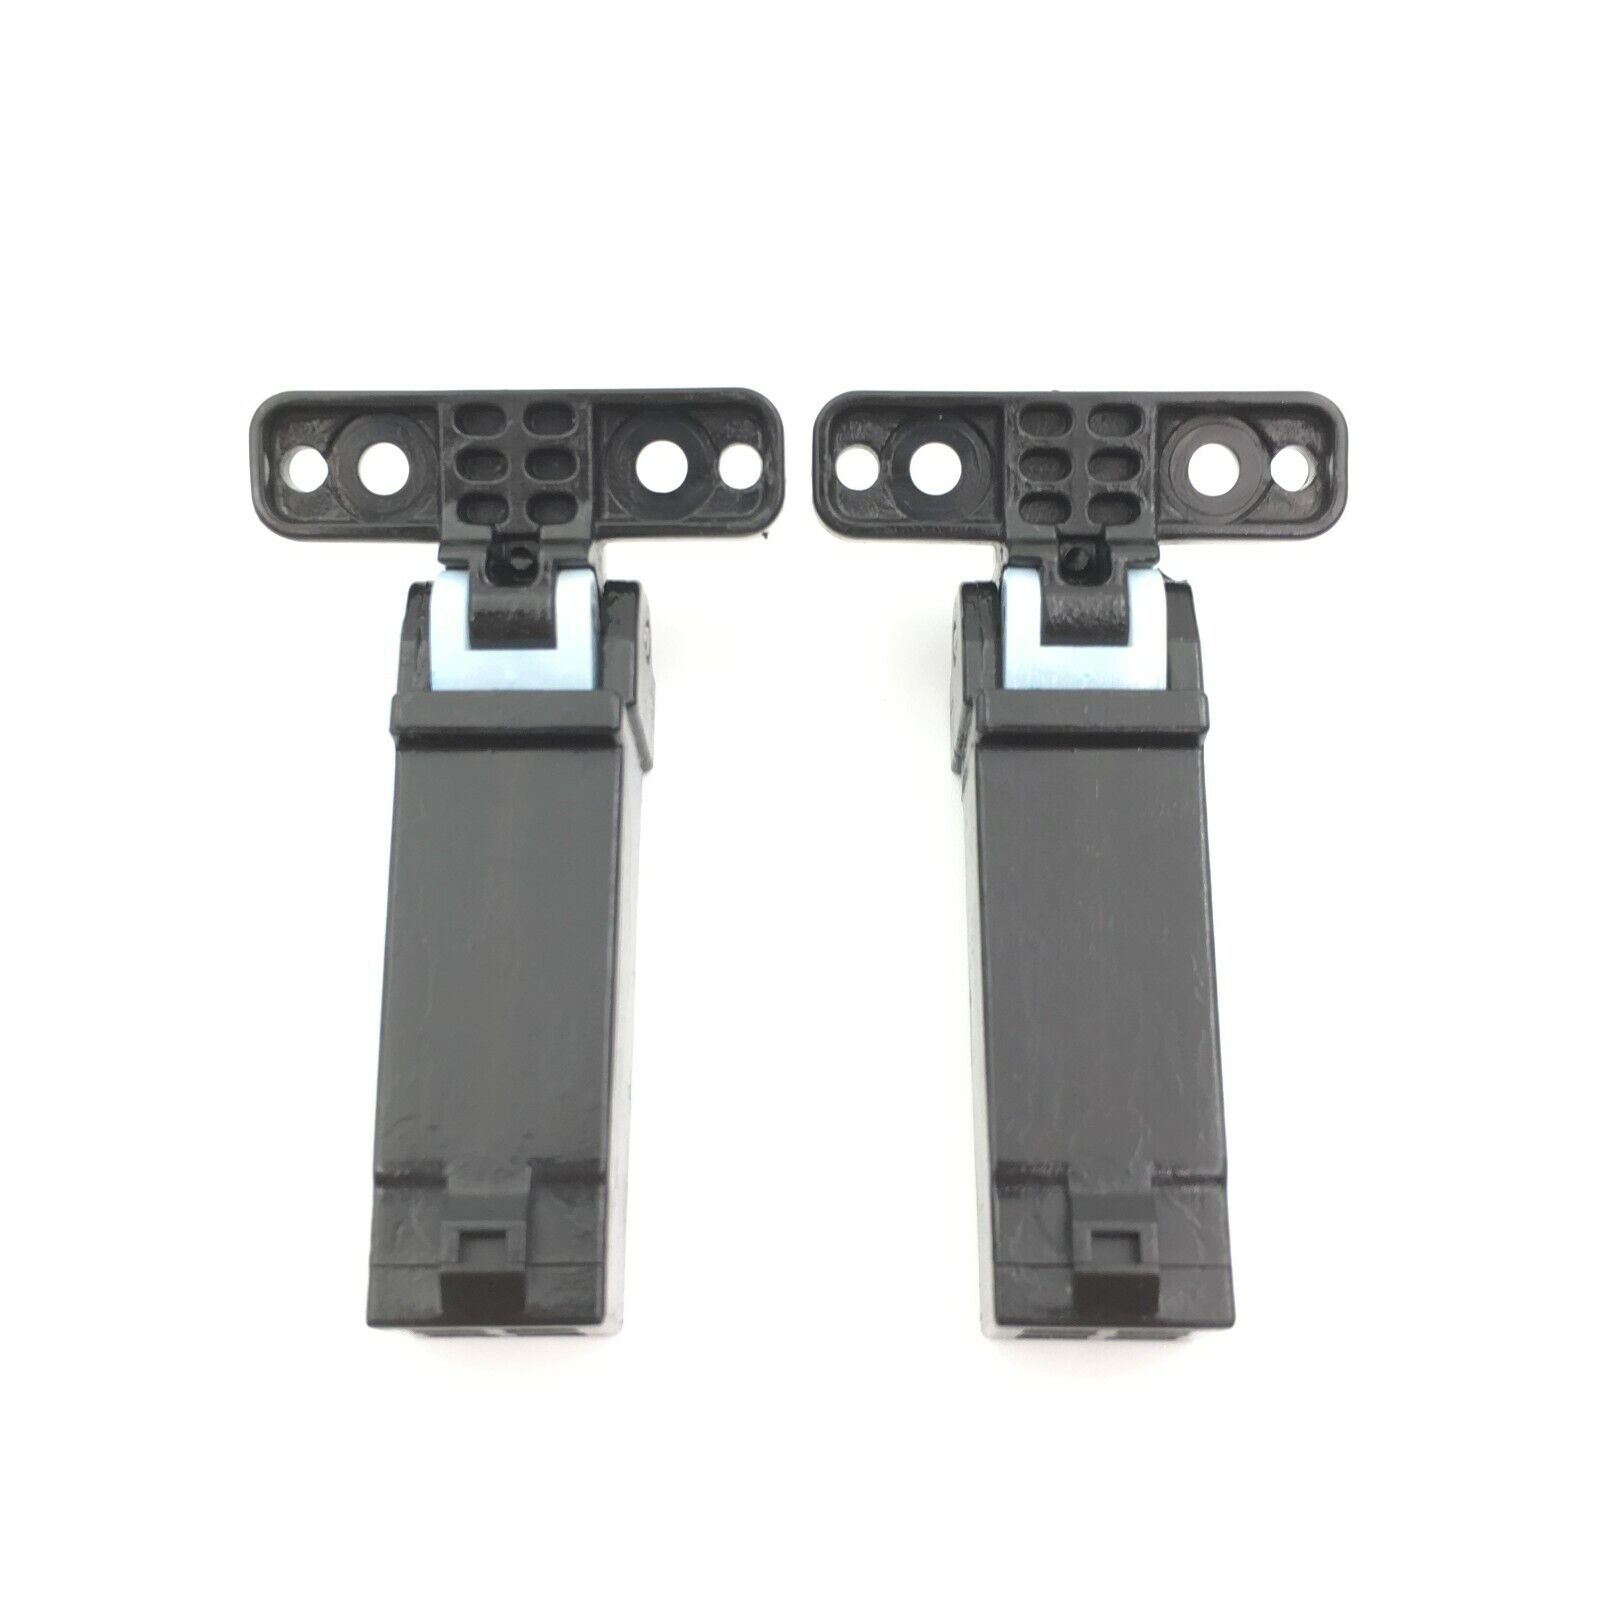 2 ADF Mea Unit Hinge for Samsung M2070 M2675 M2870 M2875 M2880 M2885 M3065 M3370 Unbranded/Generic Does Not Apply